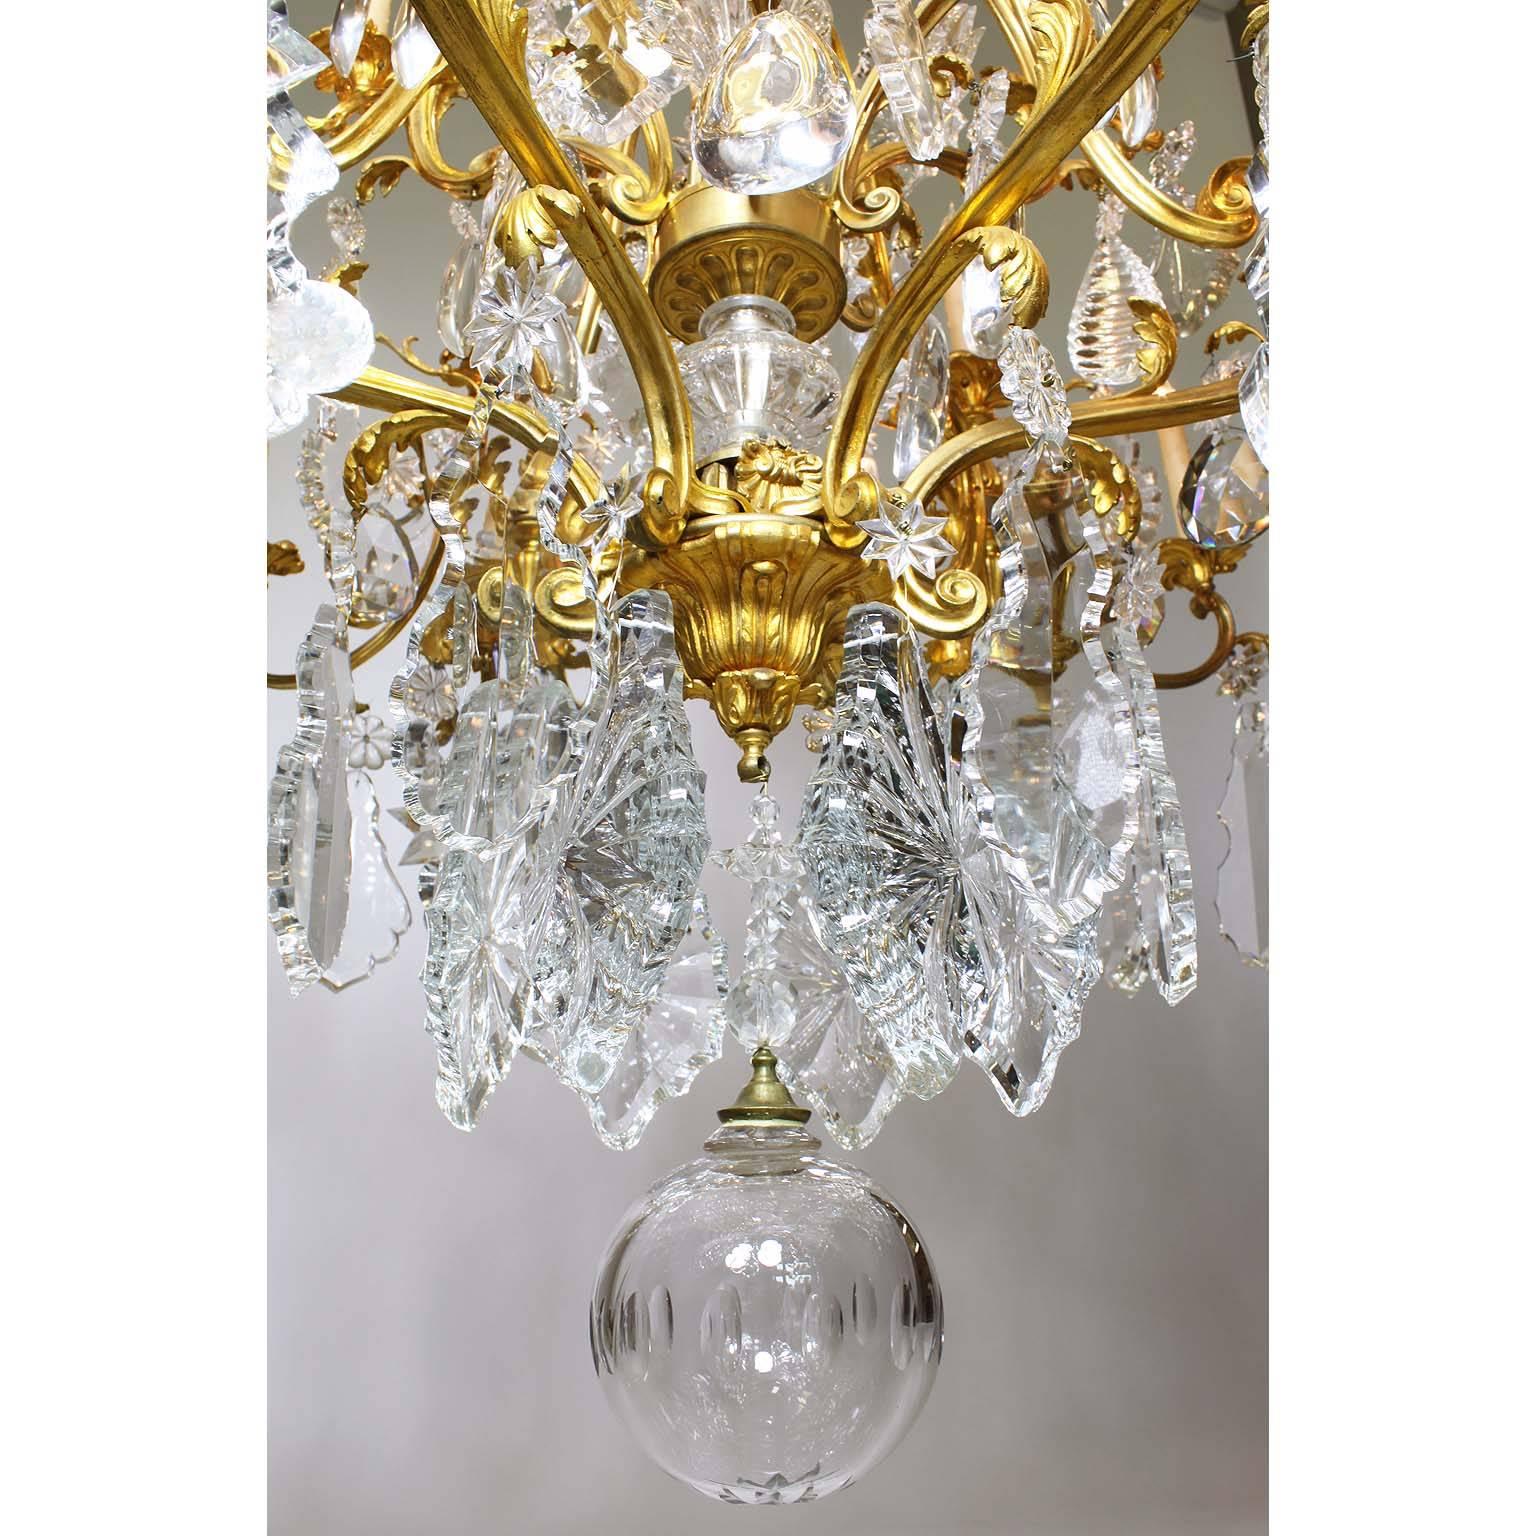 French 19th Century Louis XV Style Gilt-Bronze Crystal Chandelier Attr. Baccarat For Sale 6